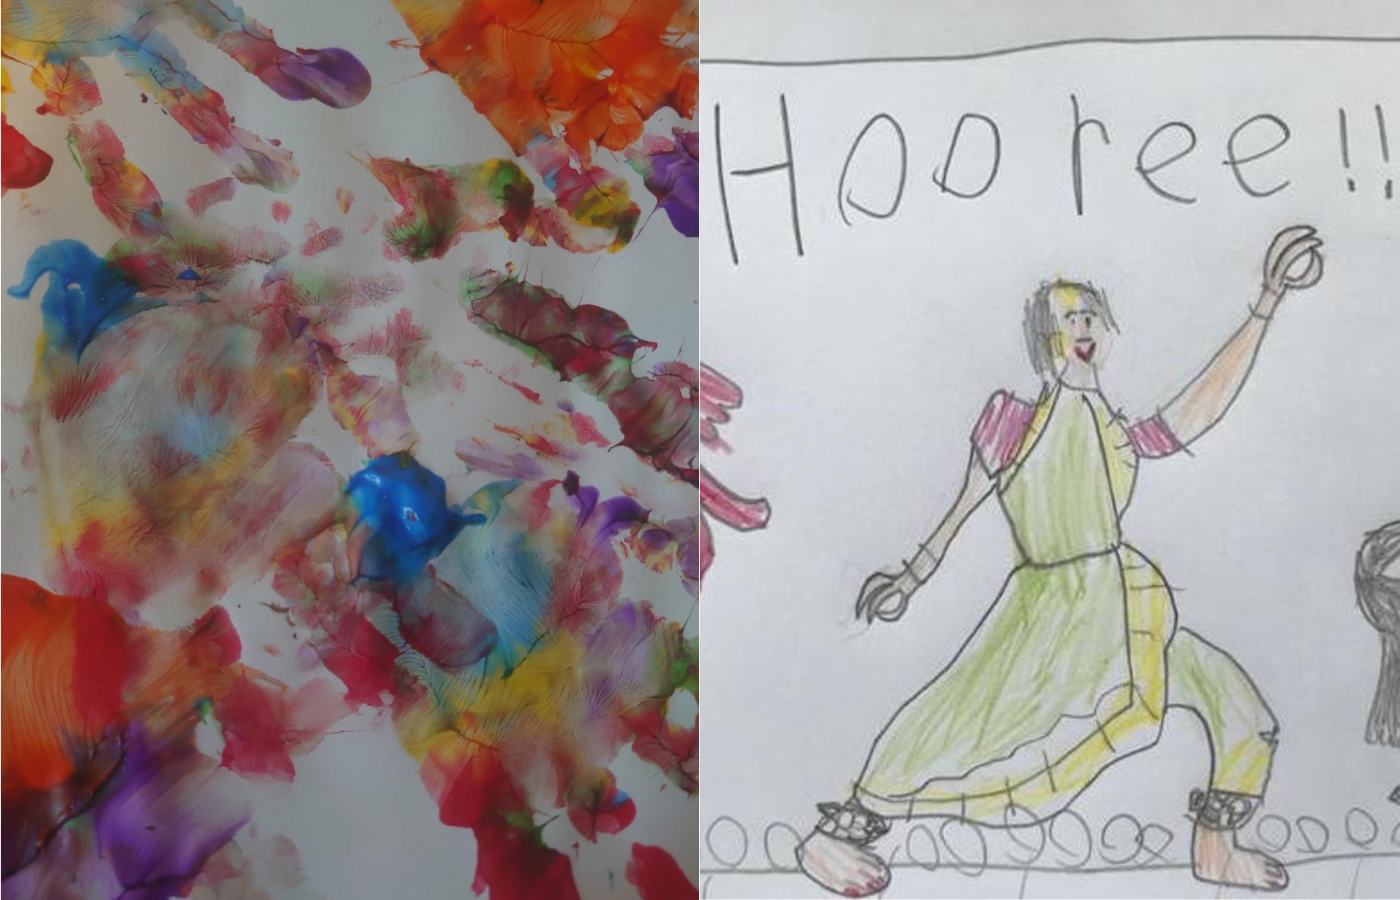 Image on the left is a series of blobs of paint, image on the right is a child's drawing of a dancer saying hooree